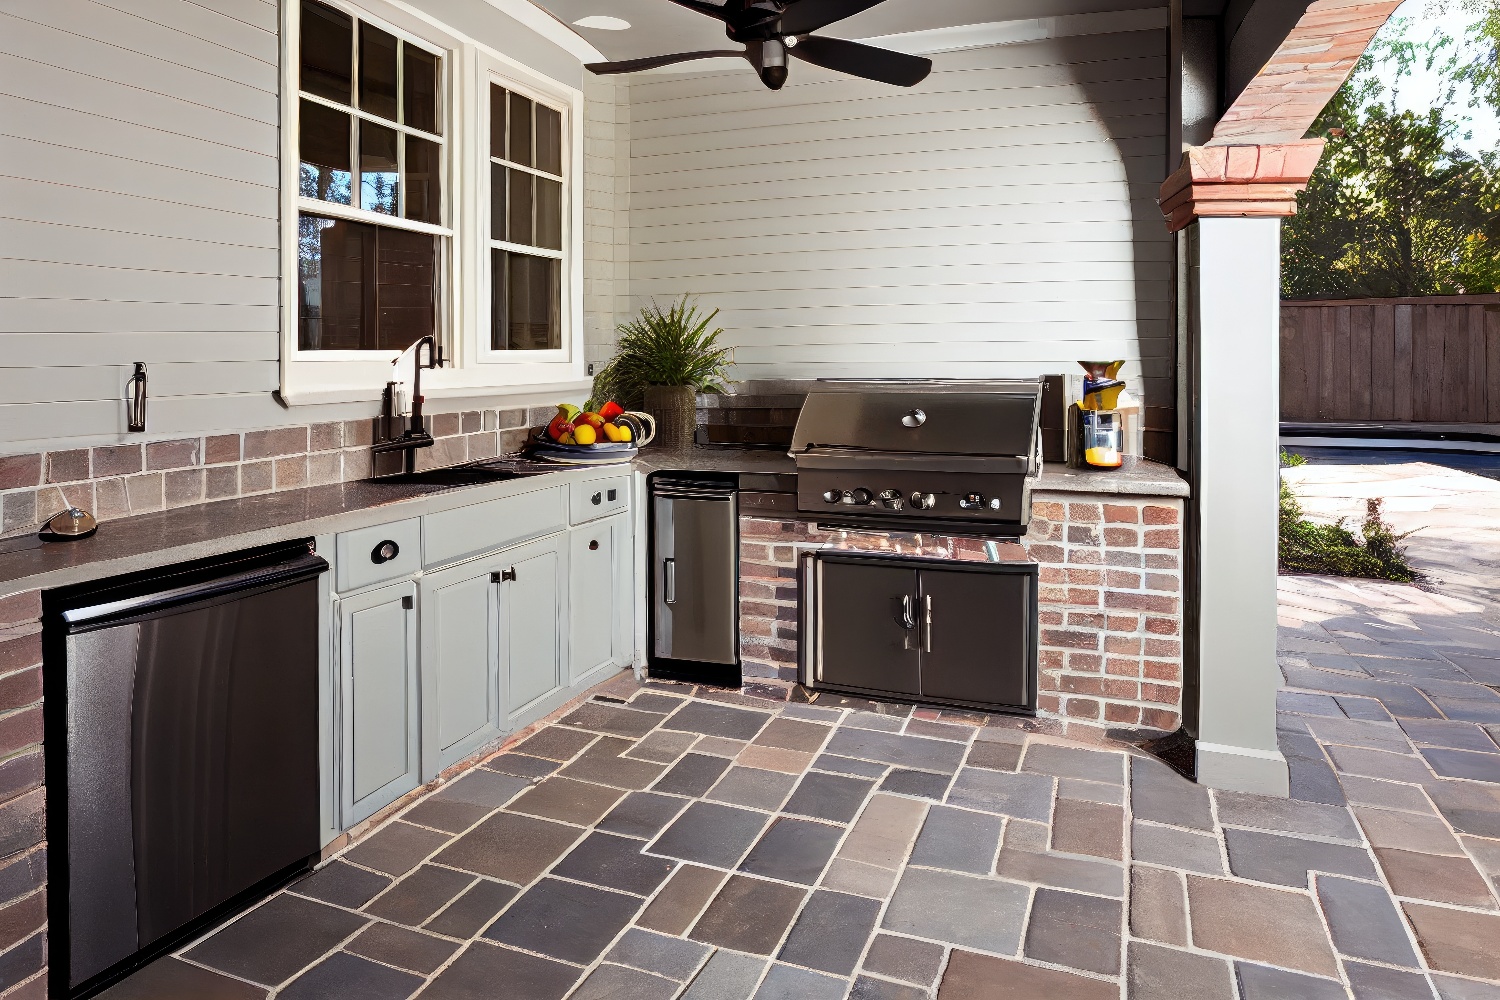 Summer is the Perfect Time for an Outdoor Kitchen Renovation